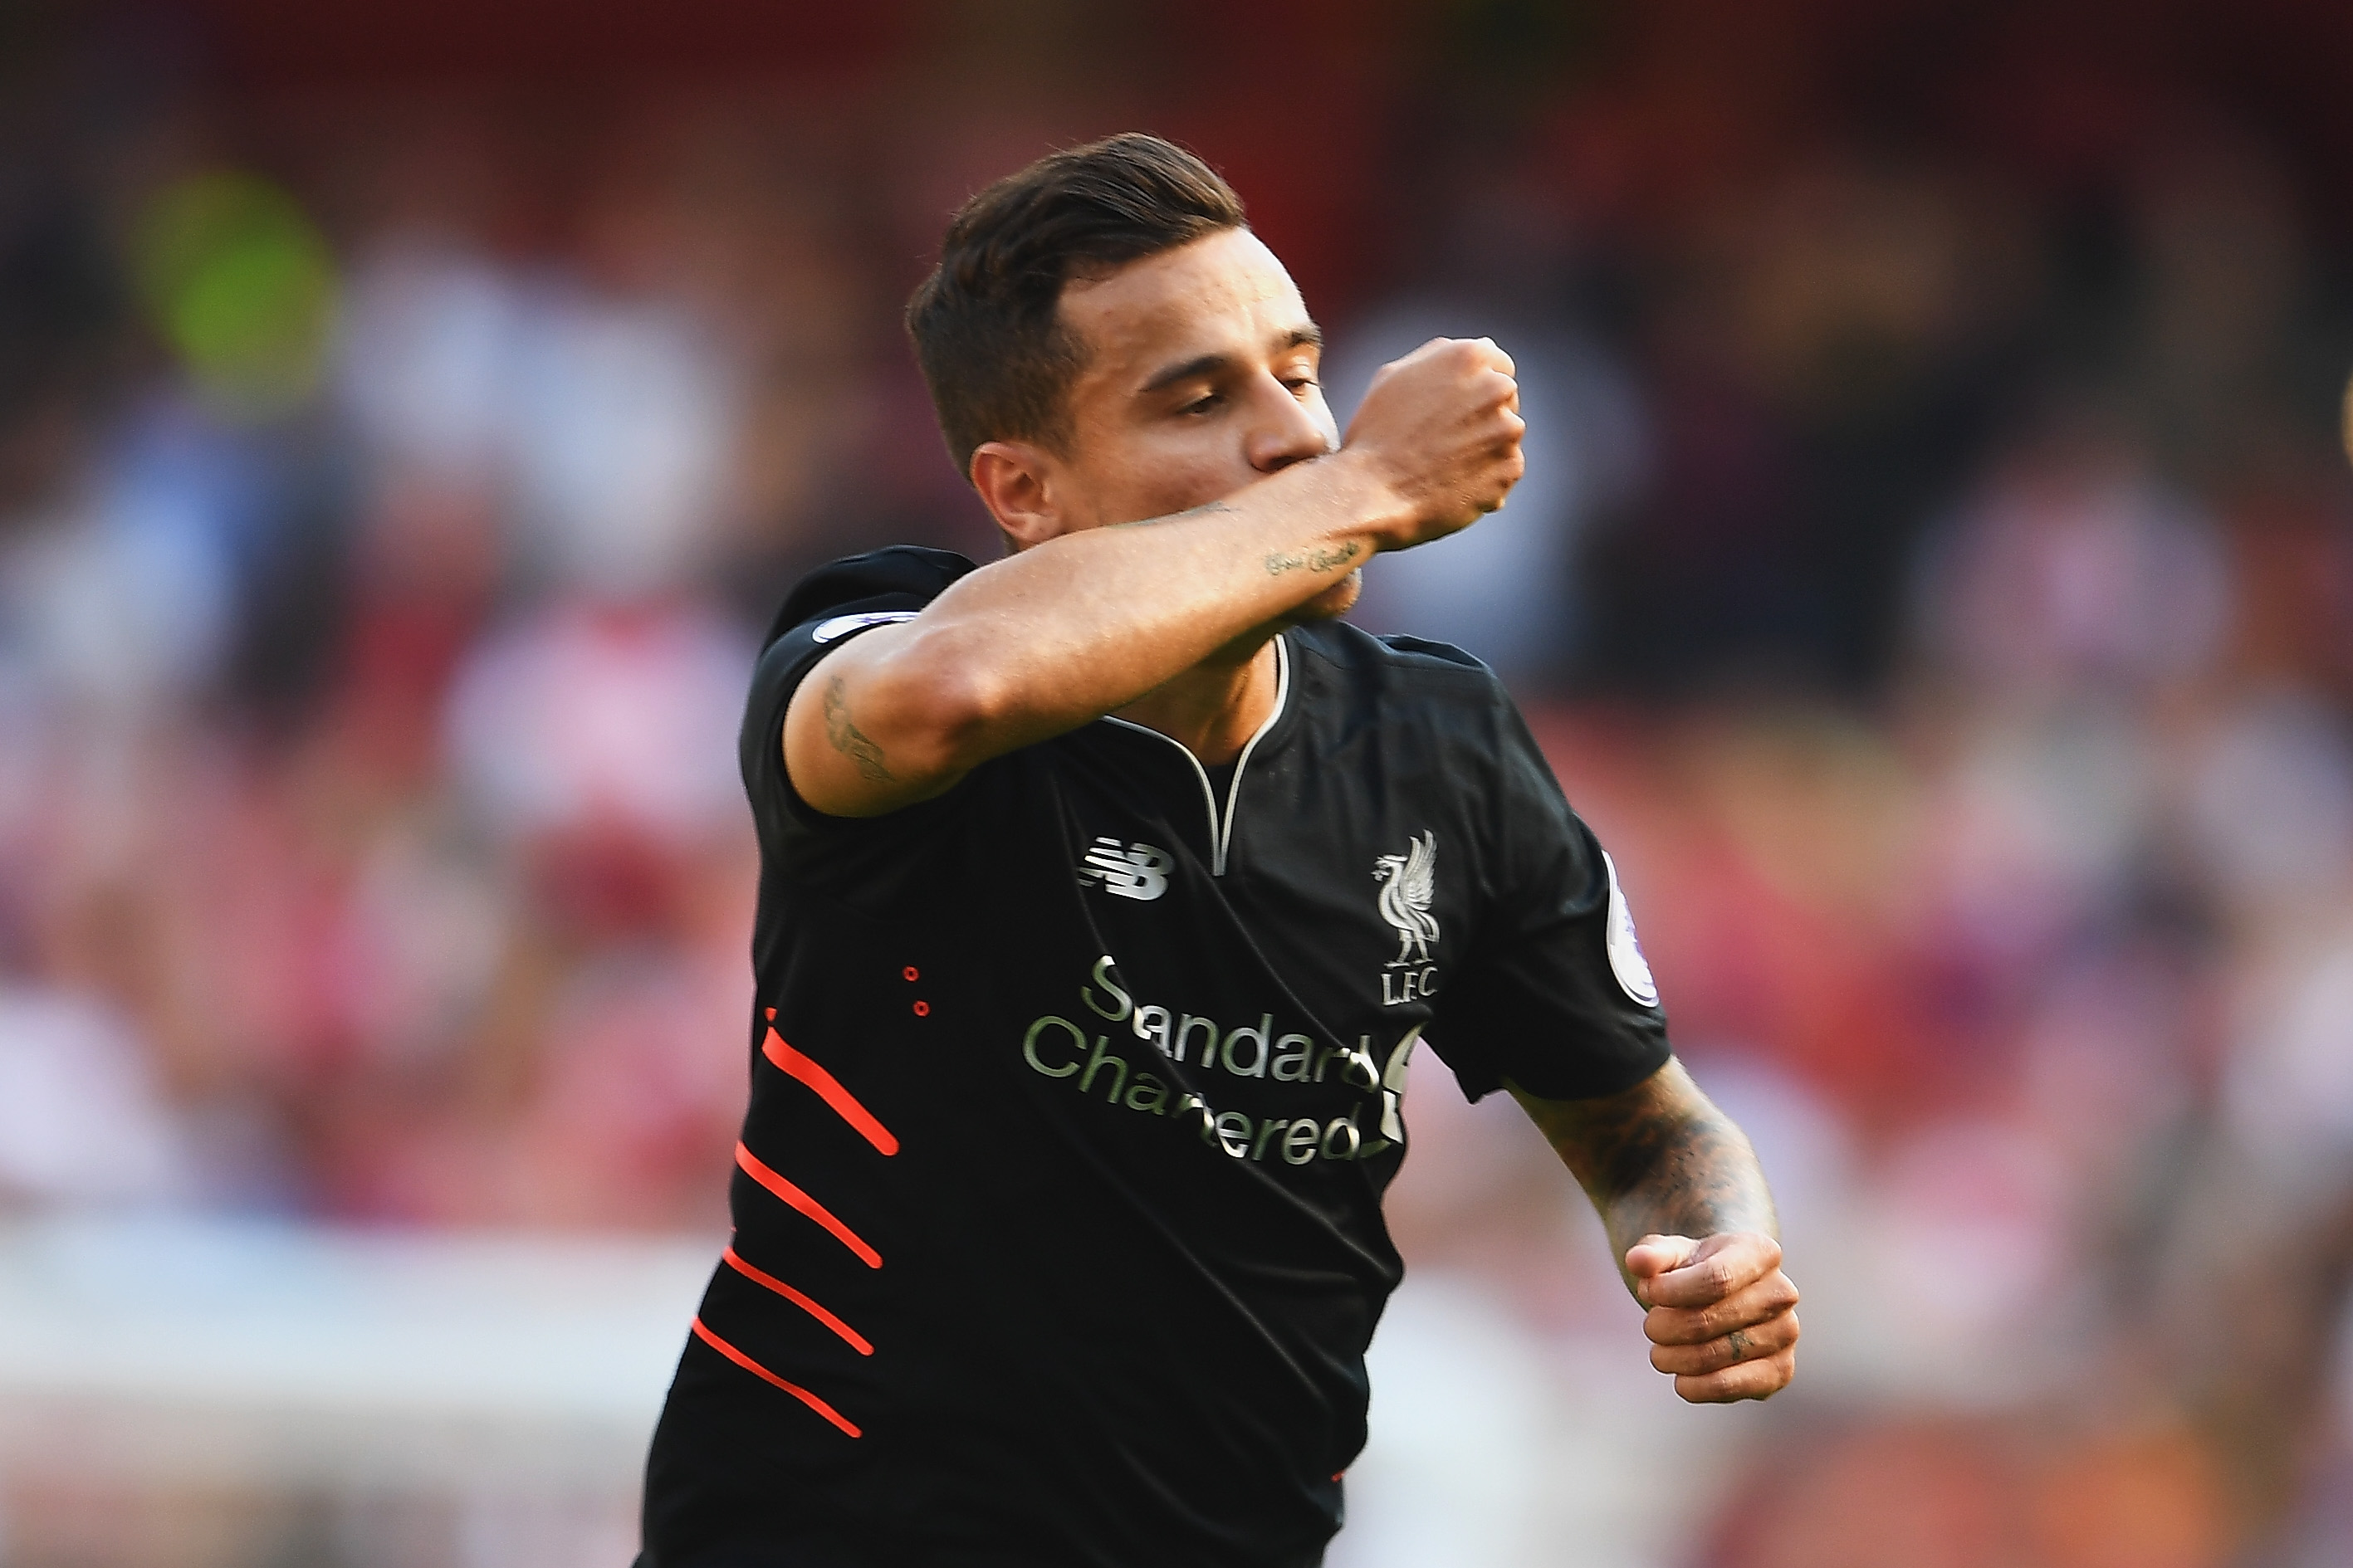 LONDON, ENGLAND - AUGUST 14:  Philippe Coutinho of Liverpool celebrates scoring his free kick during the Premier League match between Arsenal and Liverpool at Emirates Stadium on August 14, 2016 in London, England.  (Photo by Mike Hewitt/Getty Images)